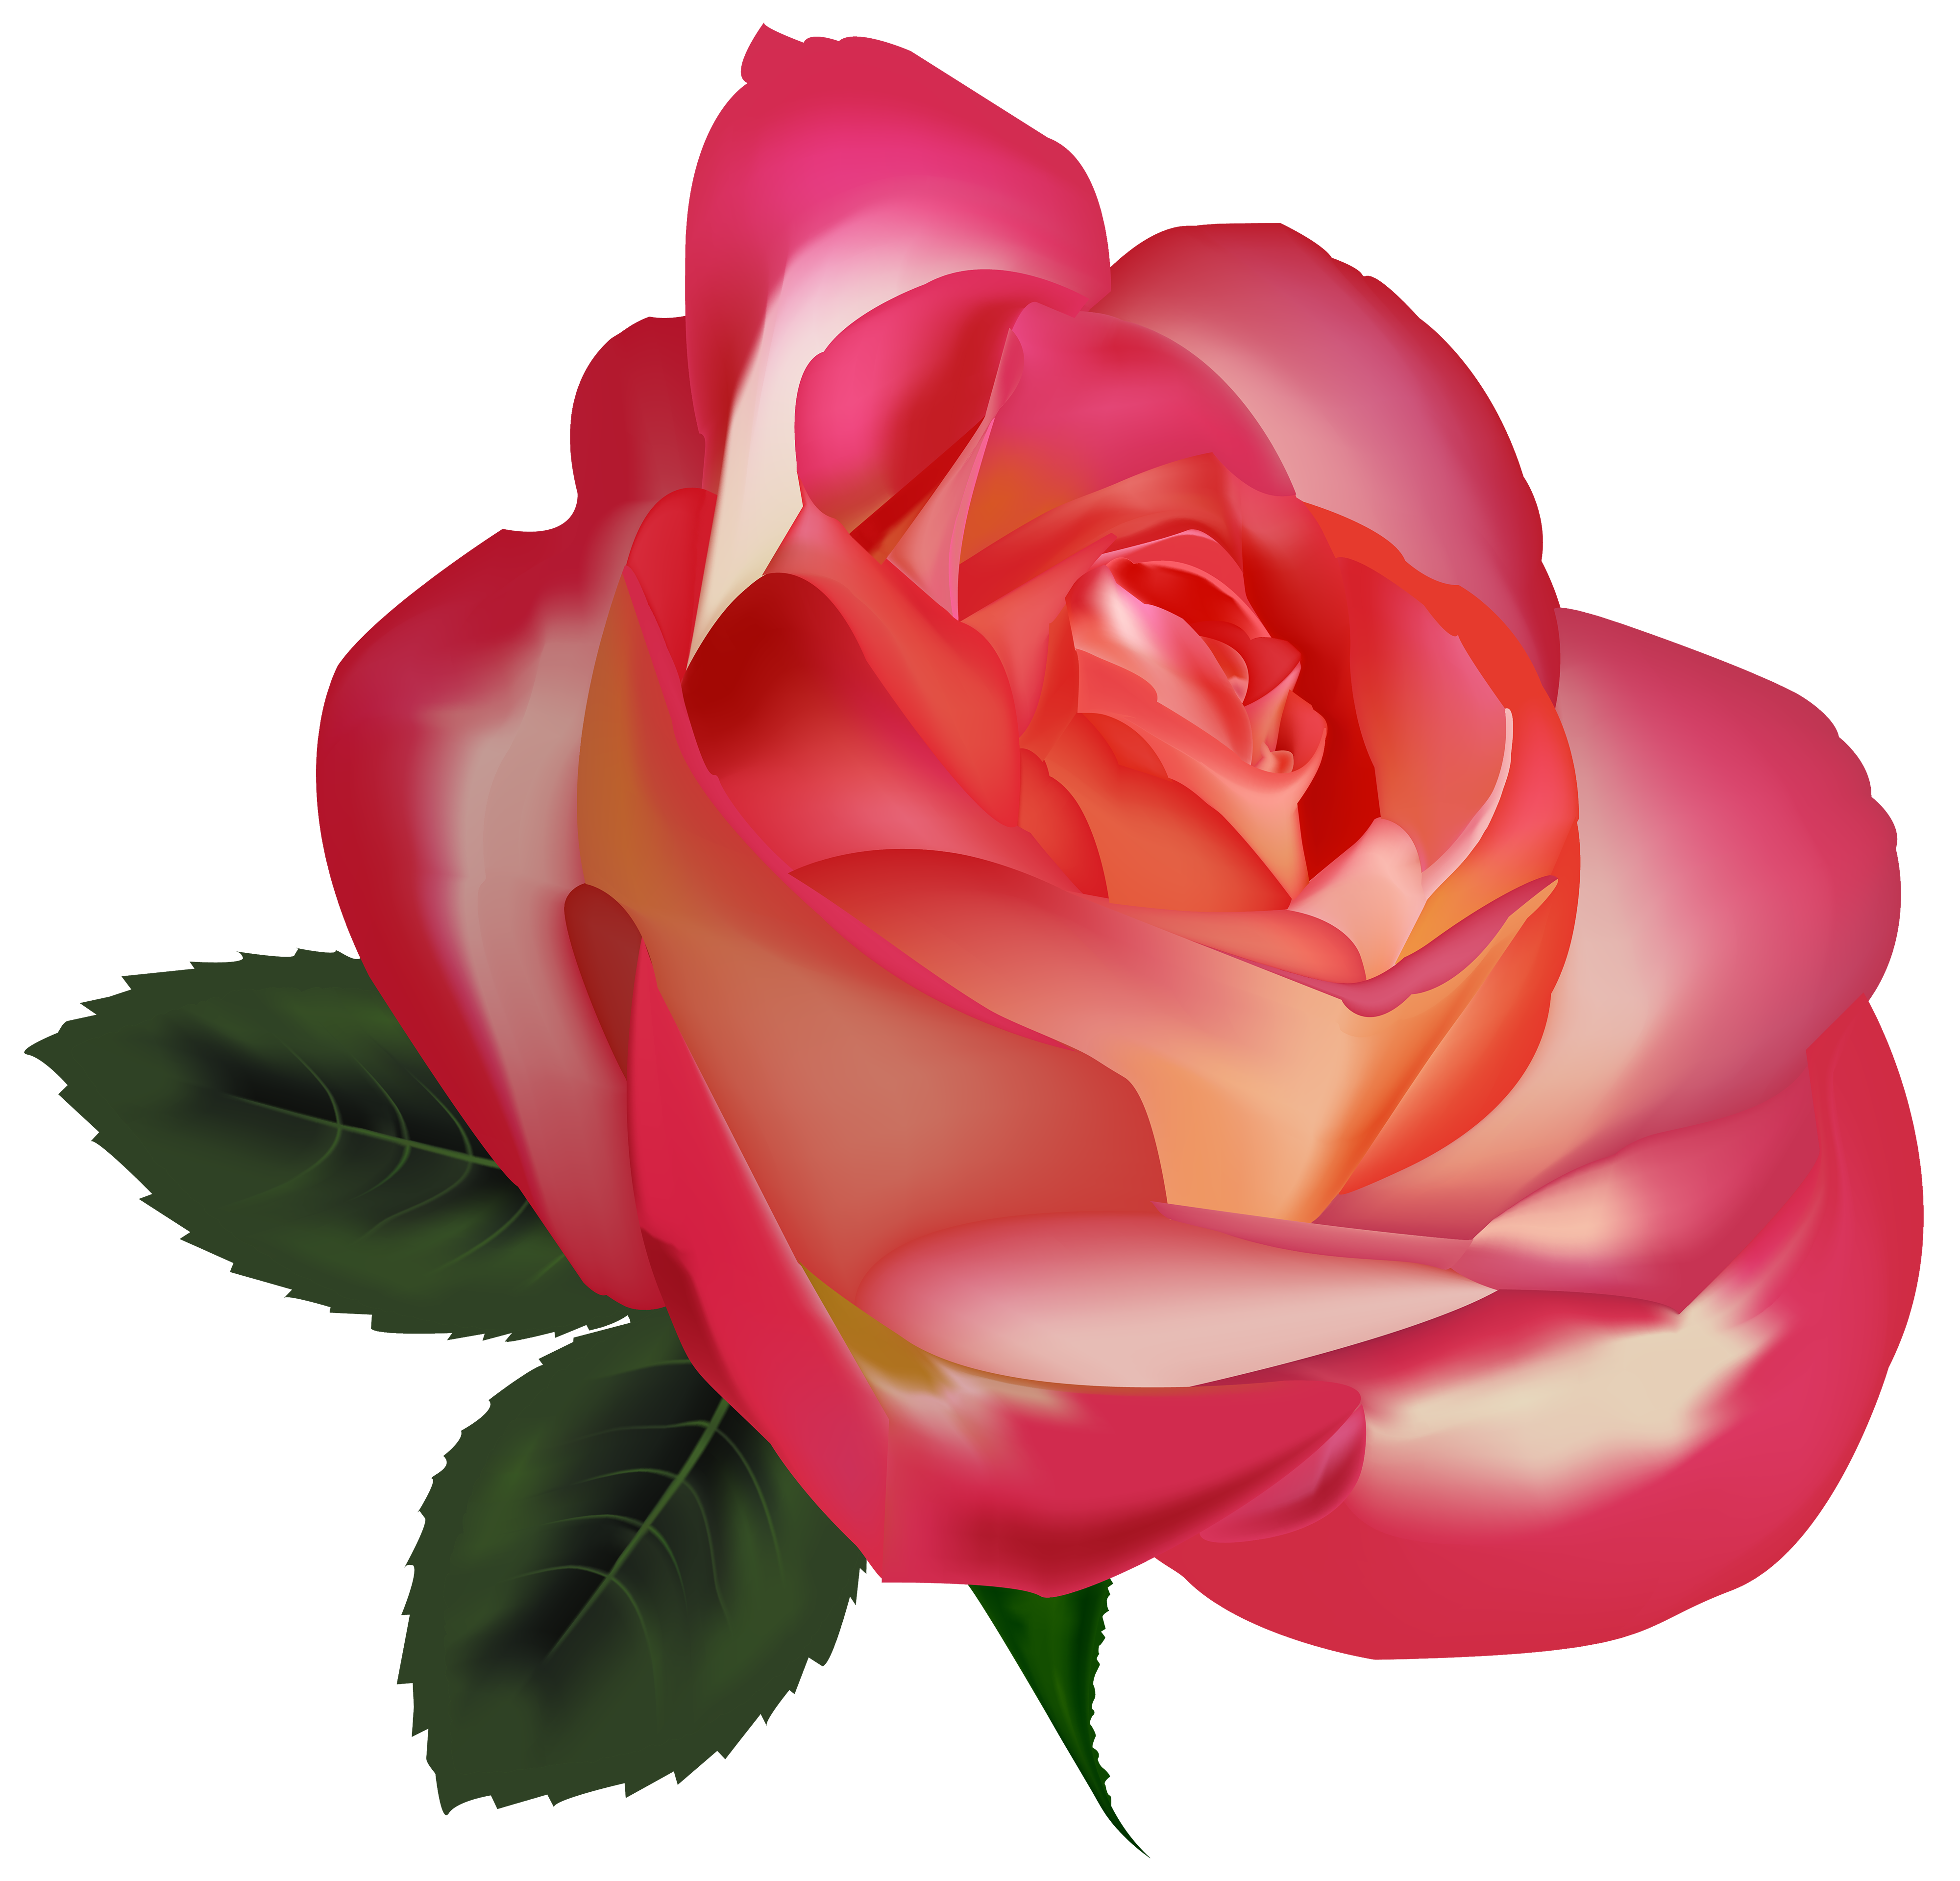 Rose clipart image best. Beautiful flower png